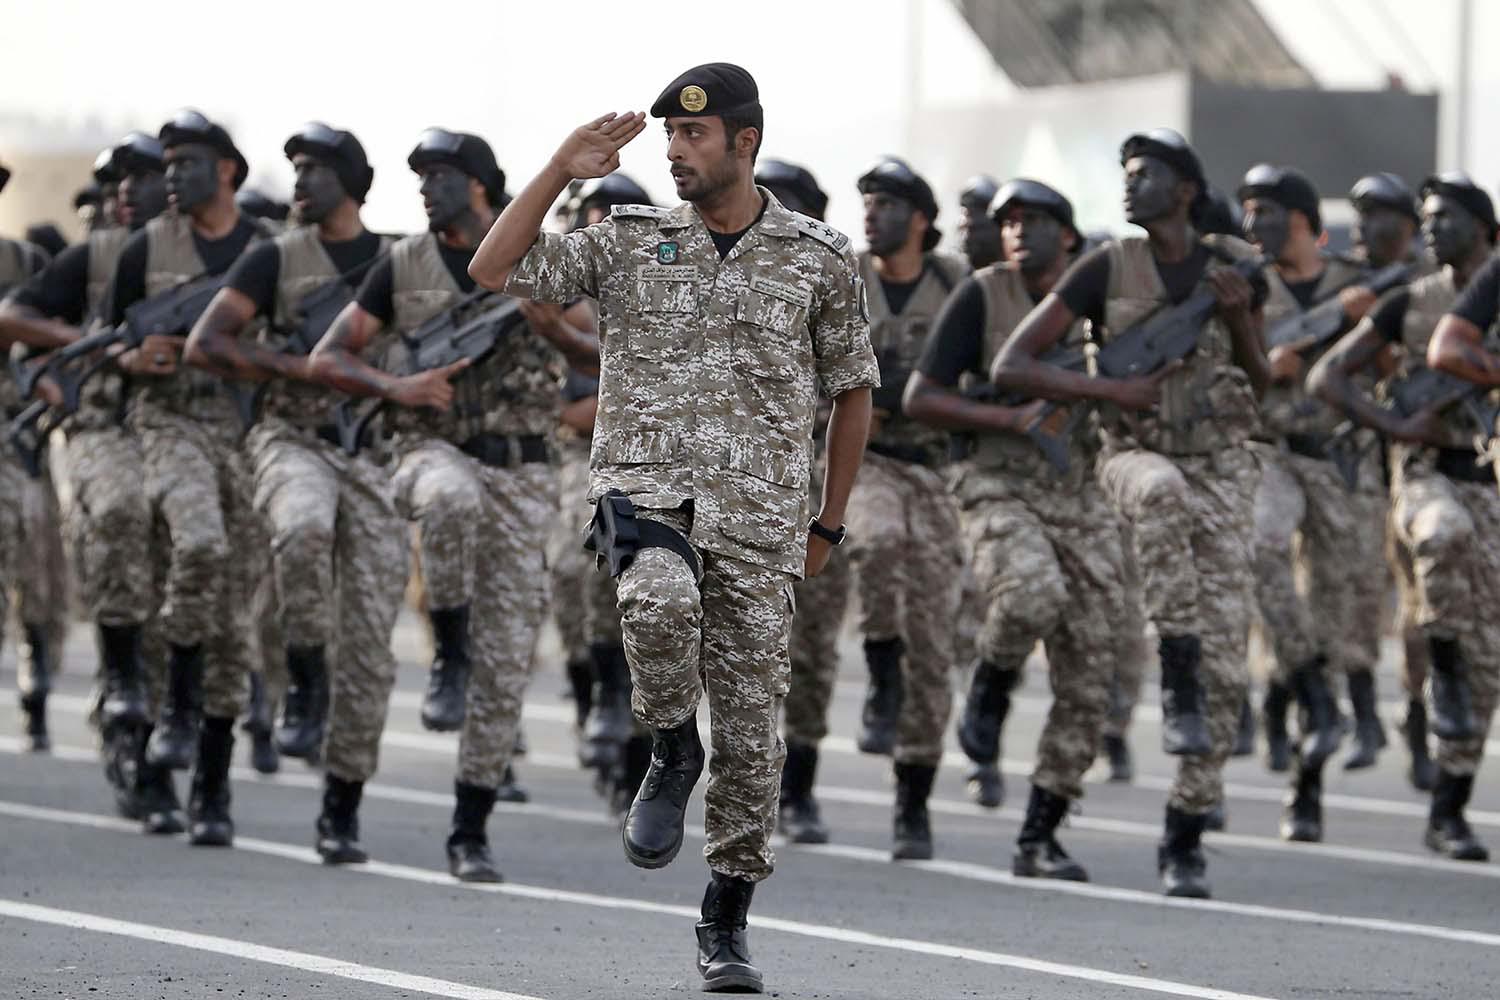 Saudi Arabia aims to spend 50% of the military budget locally by 2030